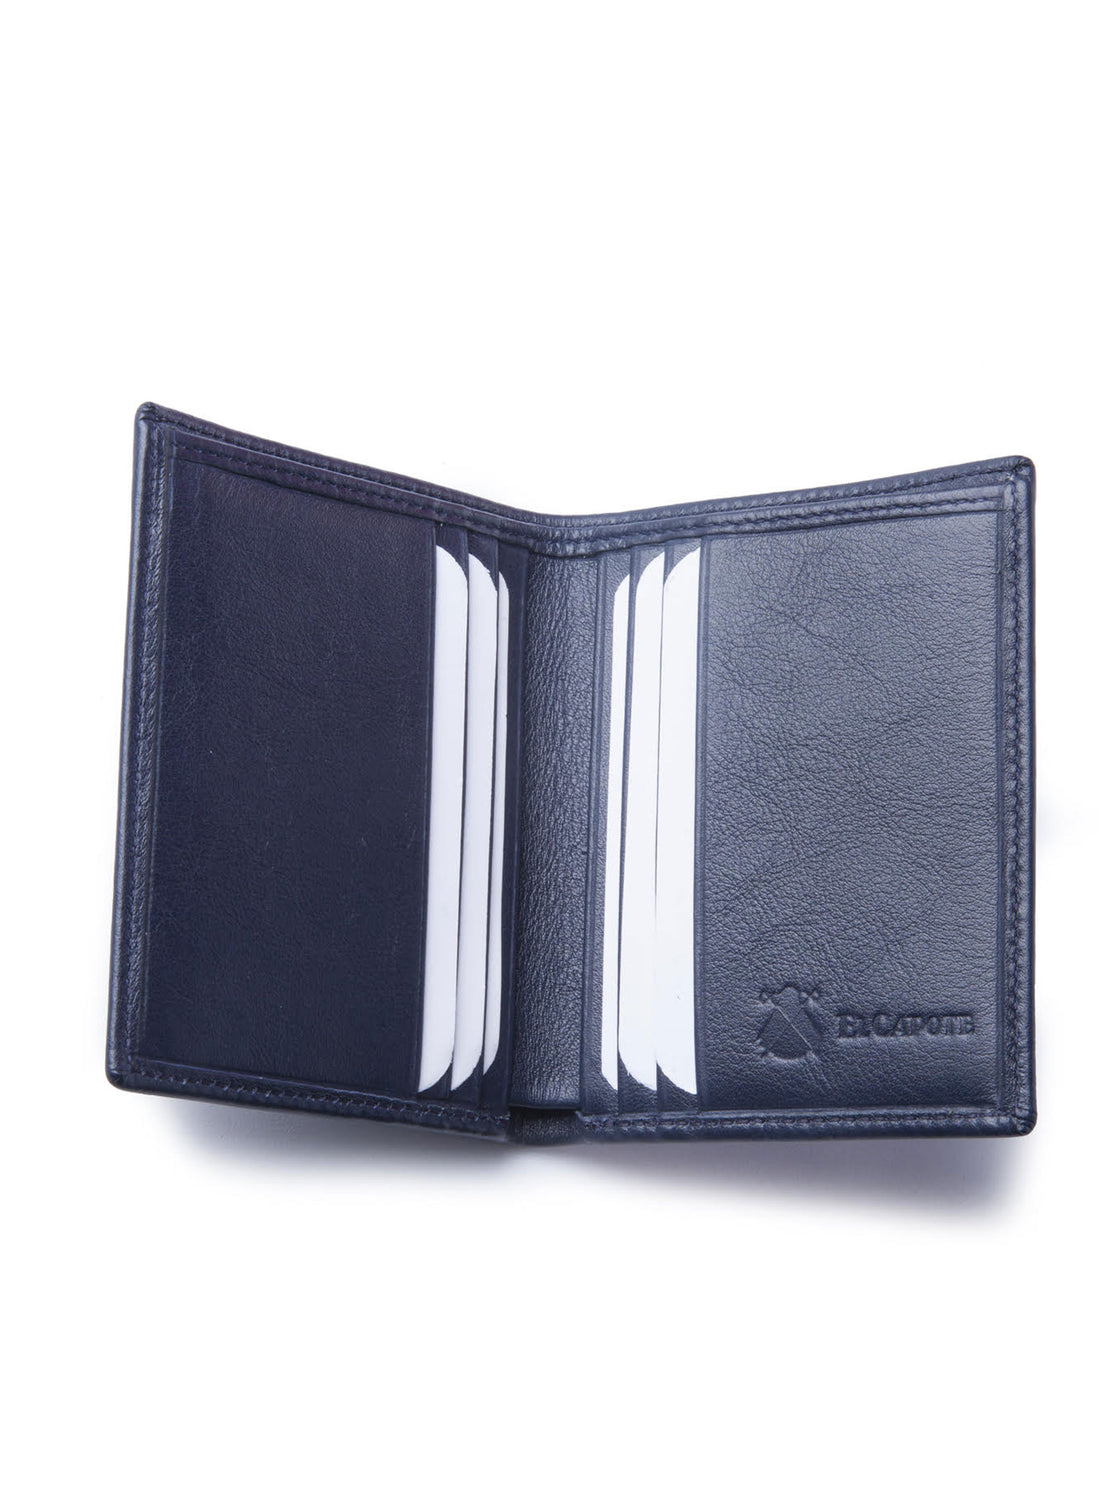 Small Navy Blue Wallet Spain 